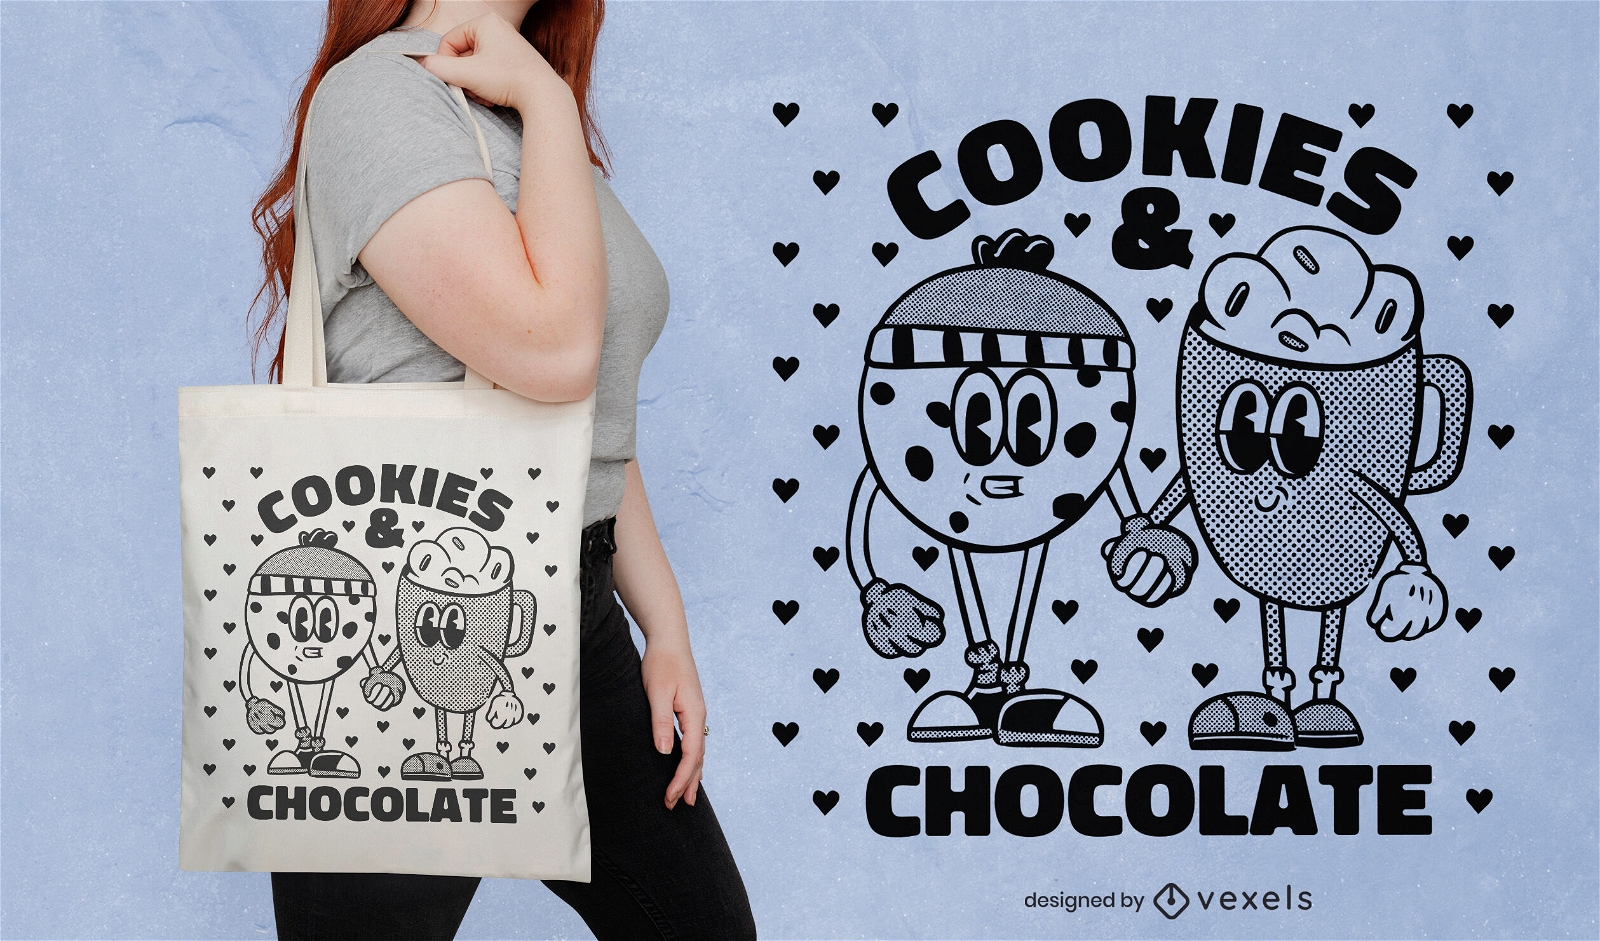 Cookies and chocolate tote bag design